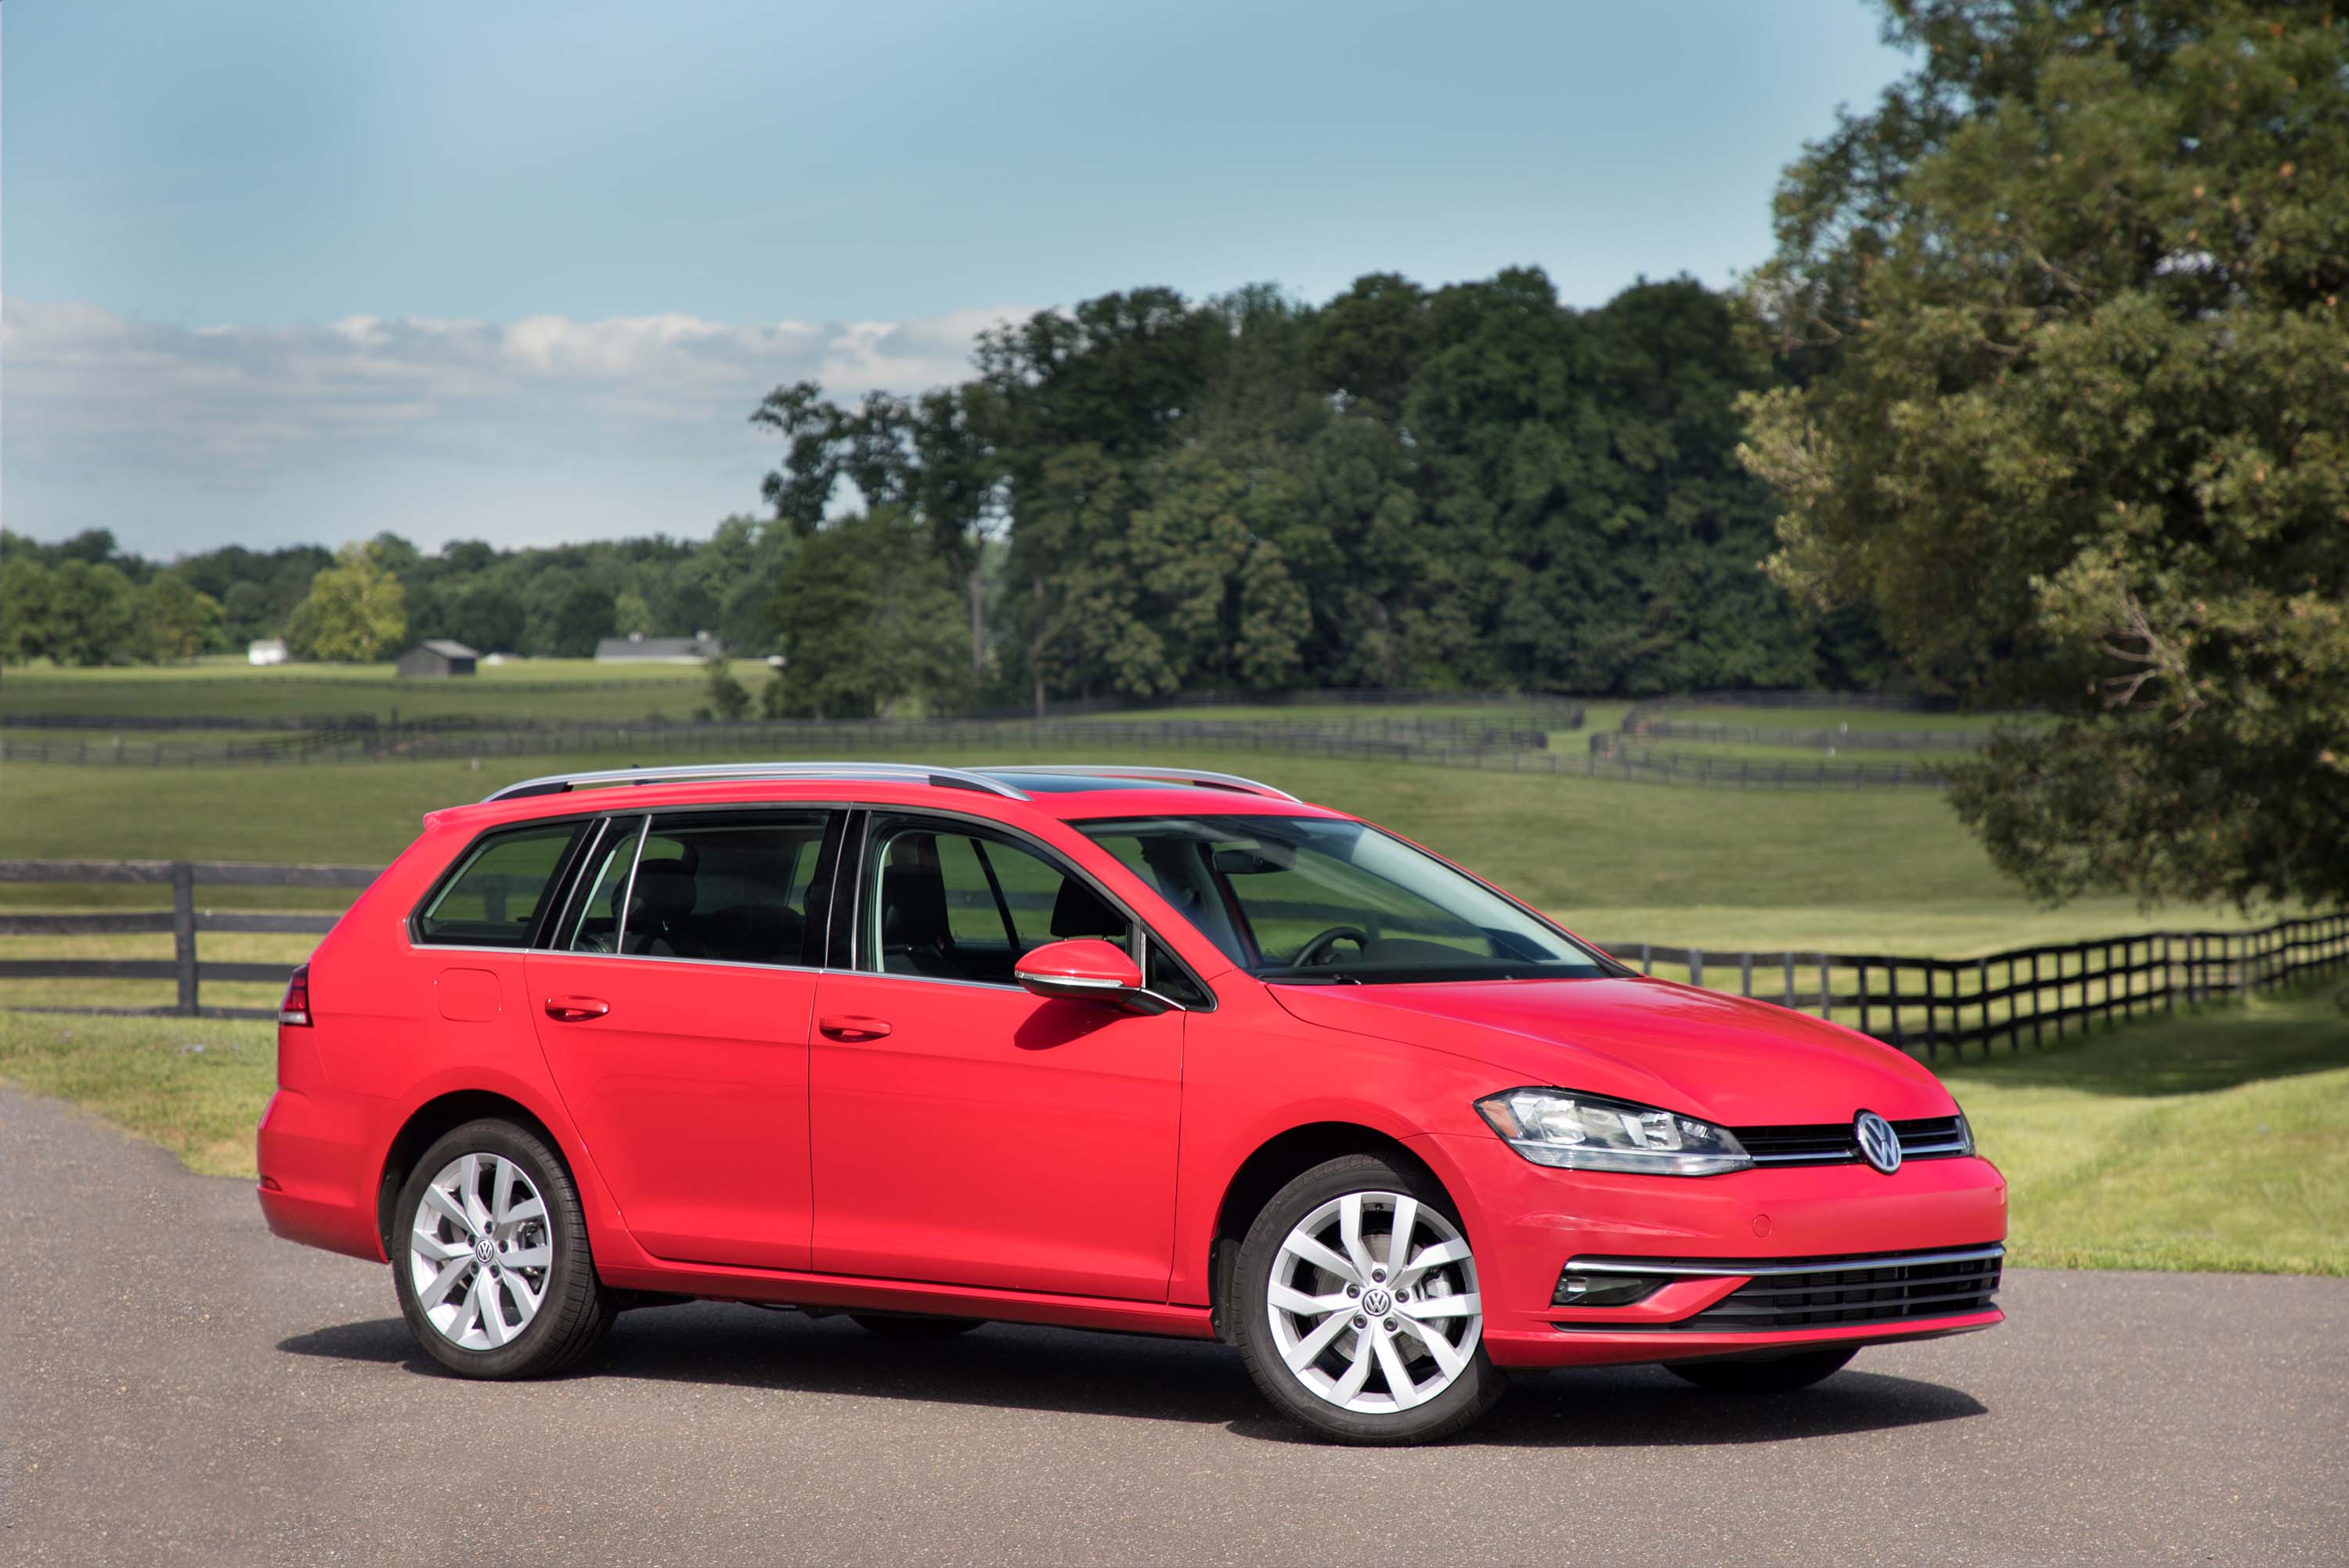 kern toon hoog 2019 Volkswagen Golf (VW) Review, Ratings, Specs, Prices, and Photos - The  Car Connection